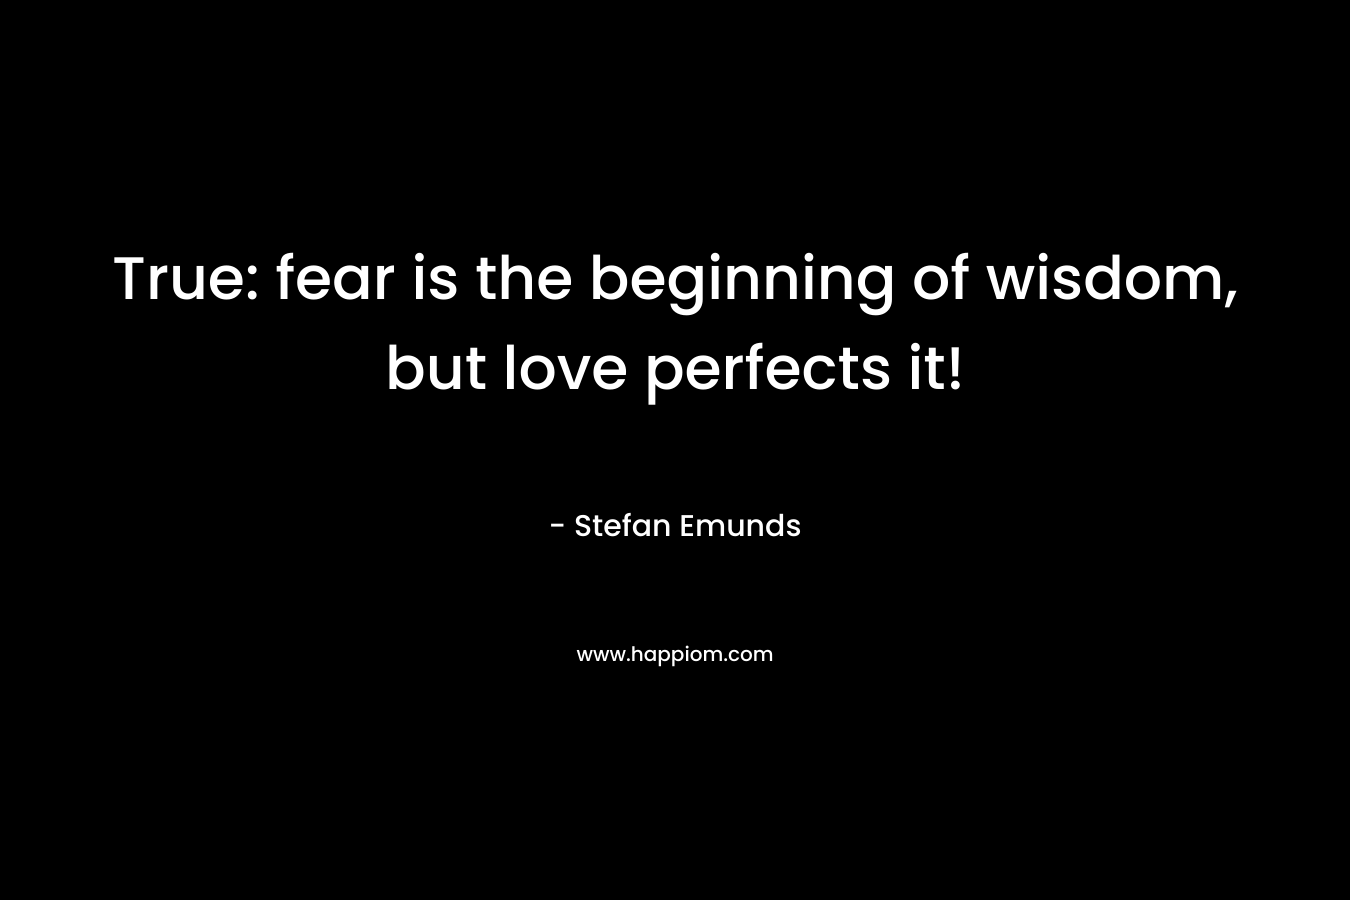 True: fear is the beginning of wisdom, but love perfects it!